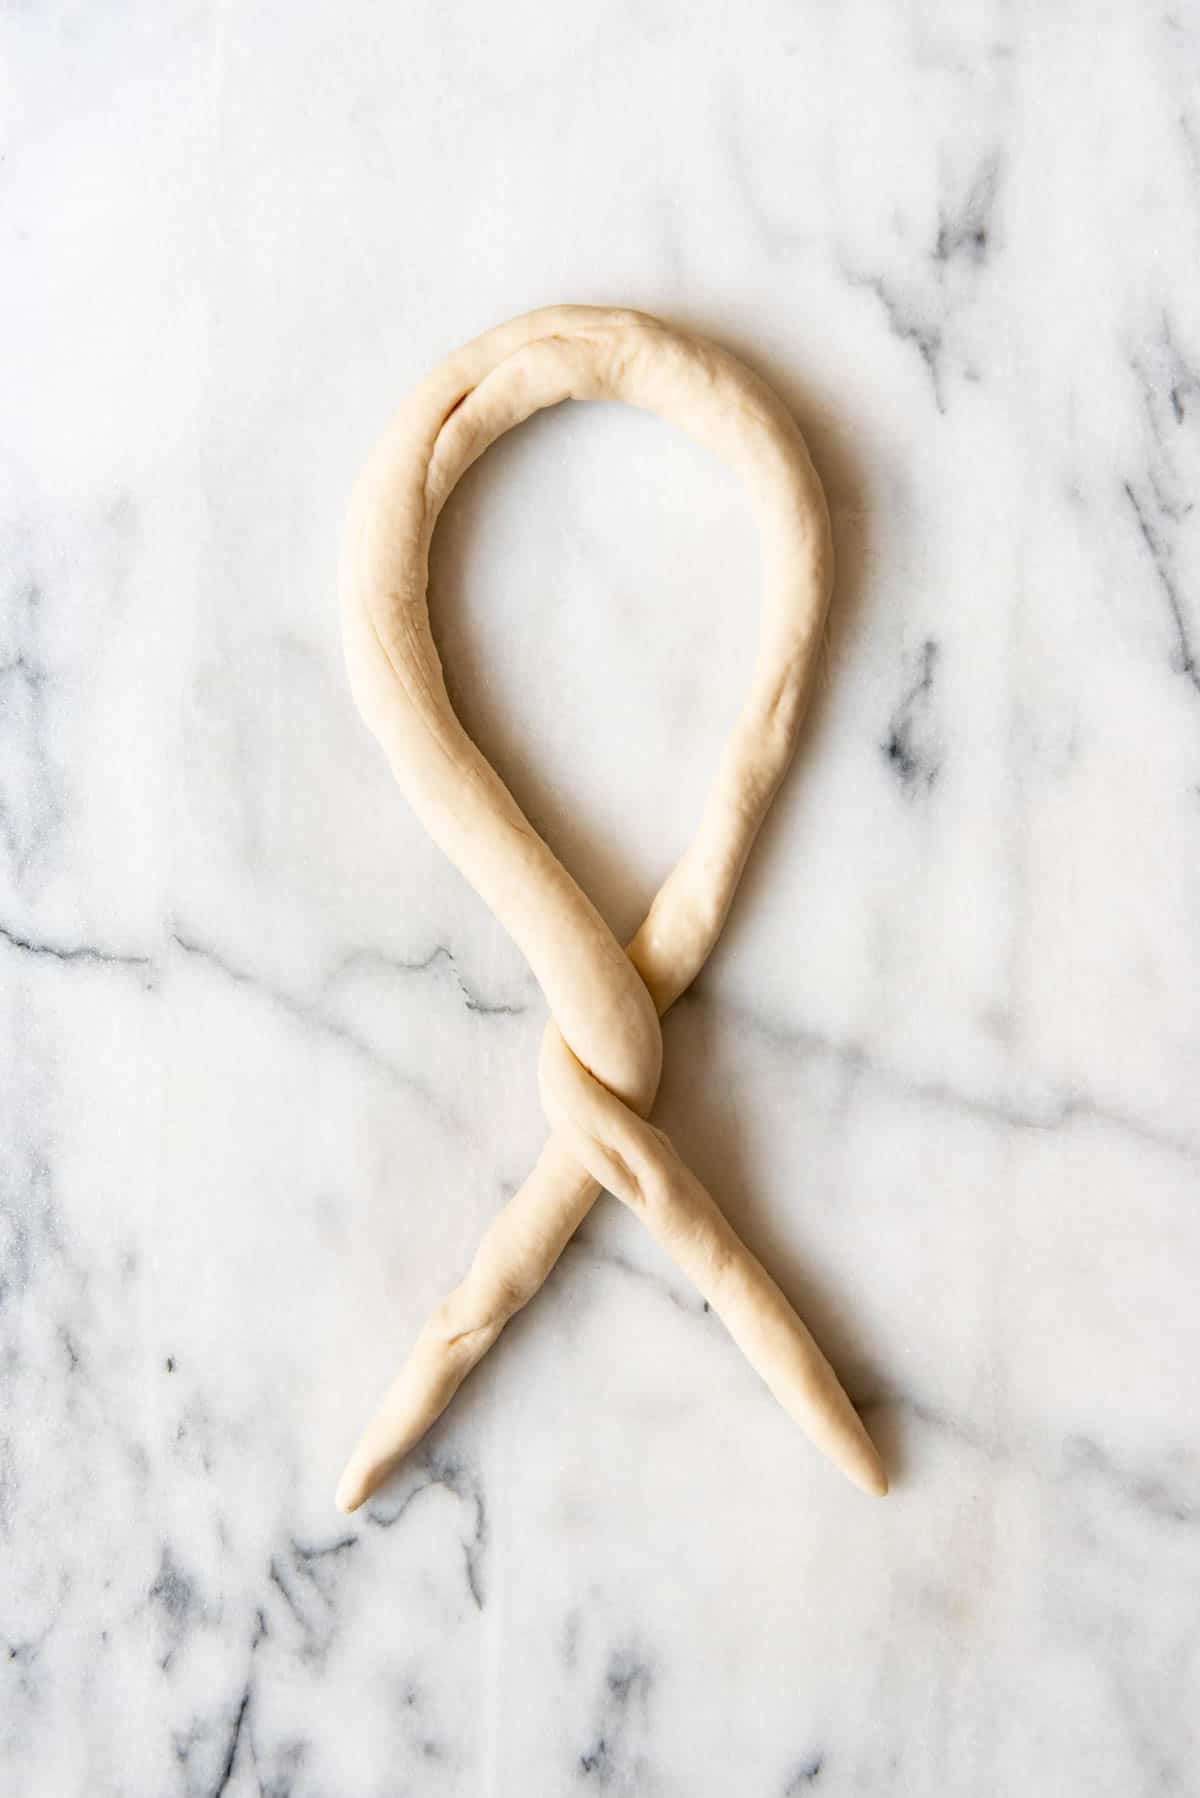 An image of a pretzel  dough rope getting ready to be twisted.